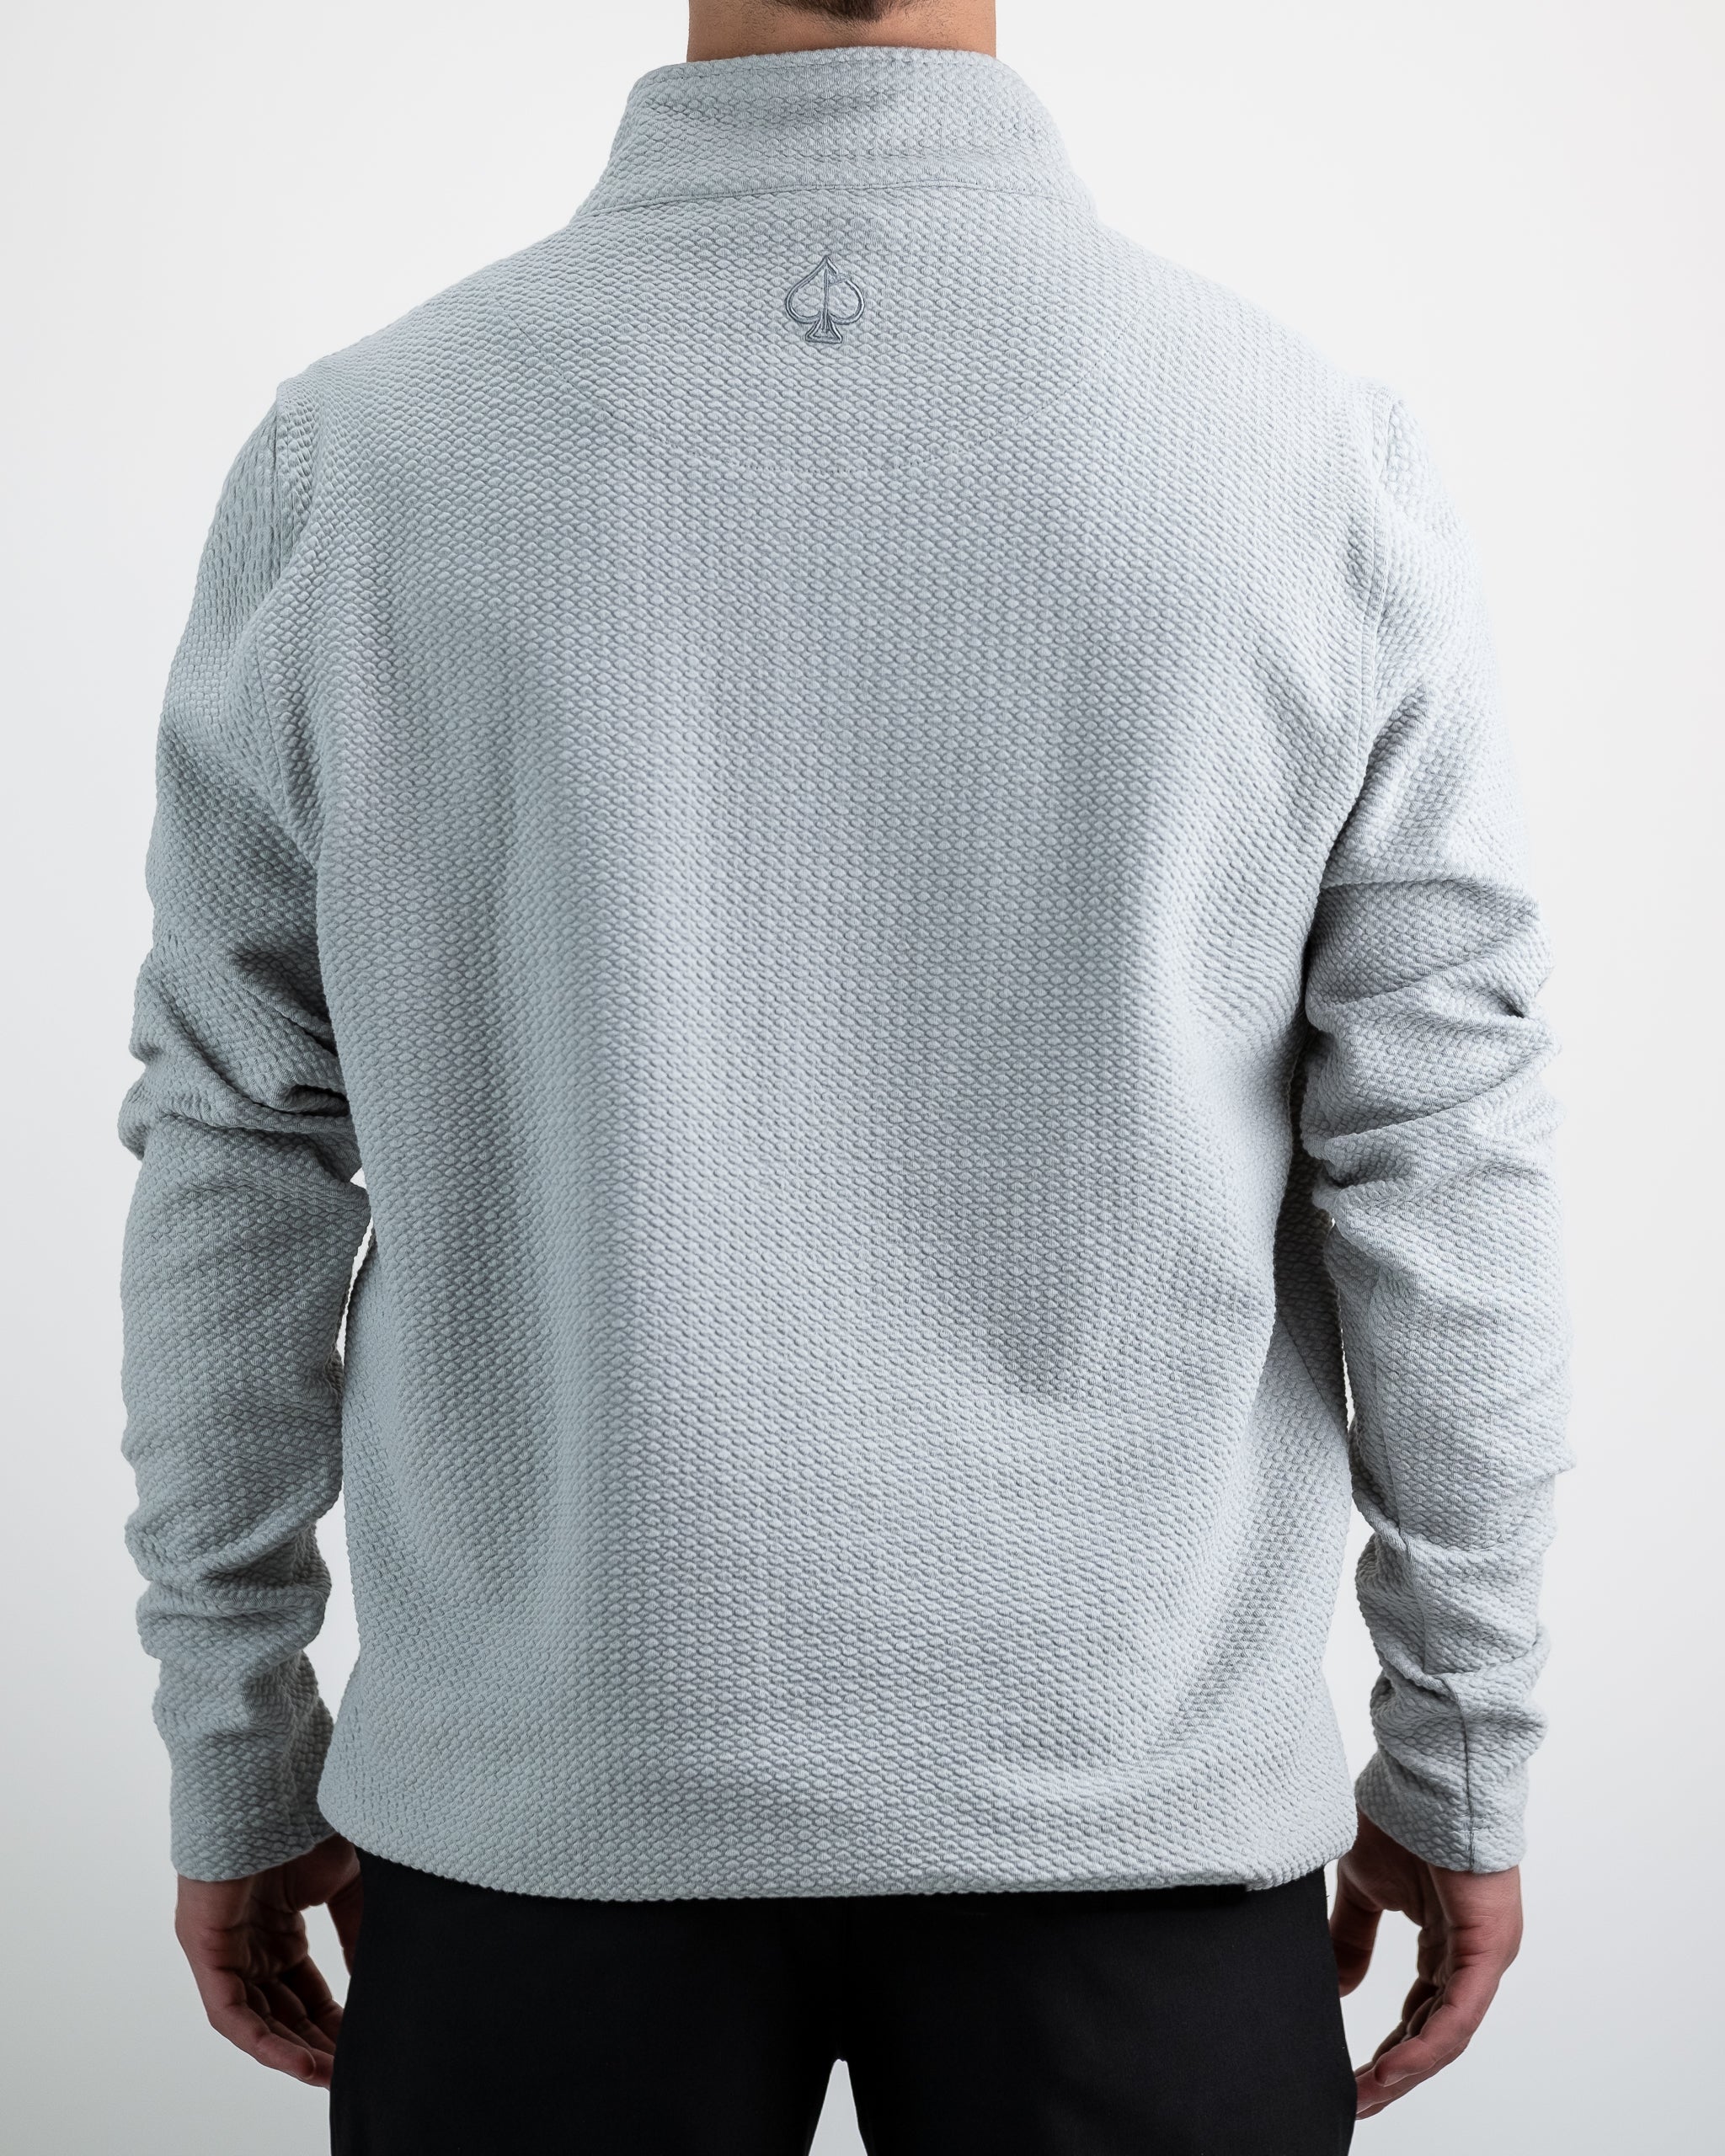 Player Preferred™ Waffle Knit Pullover - Stone